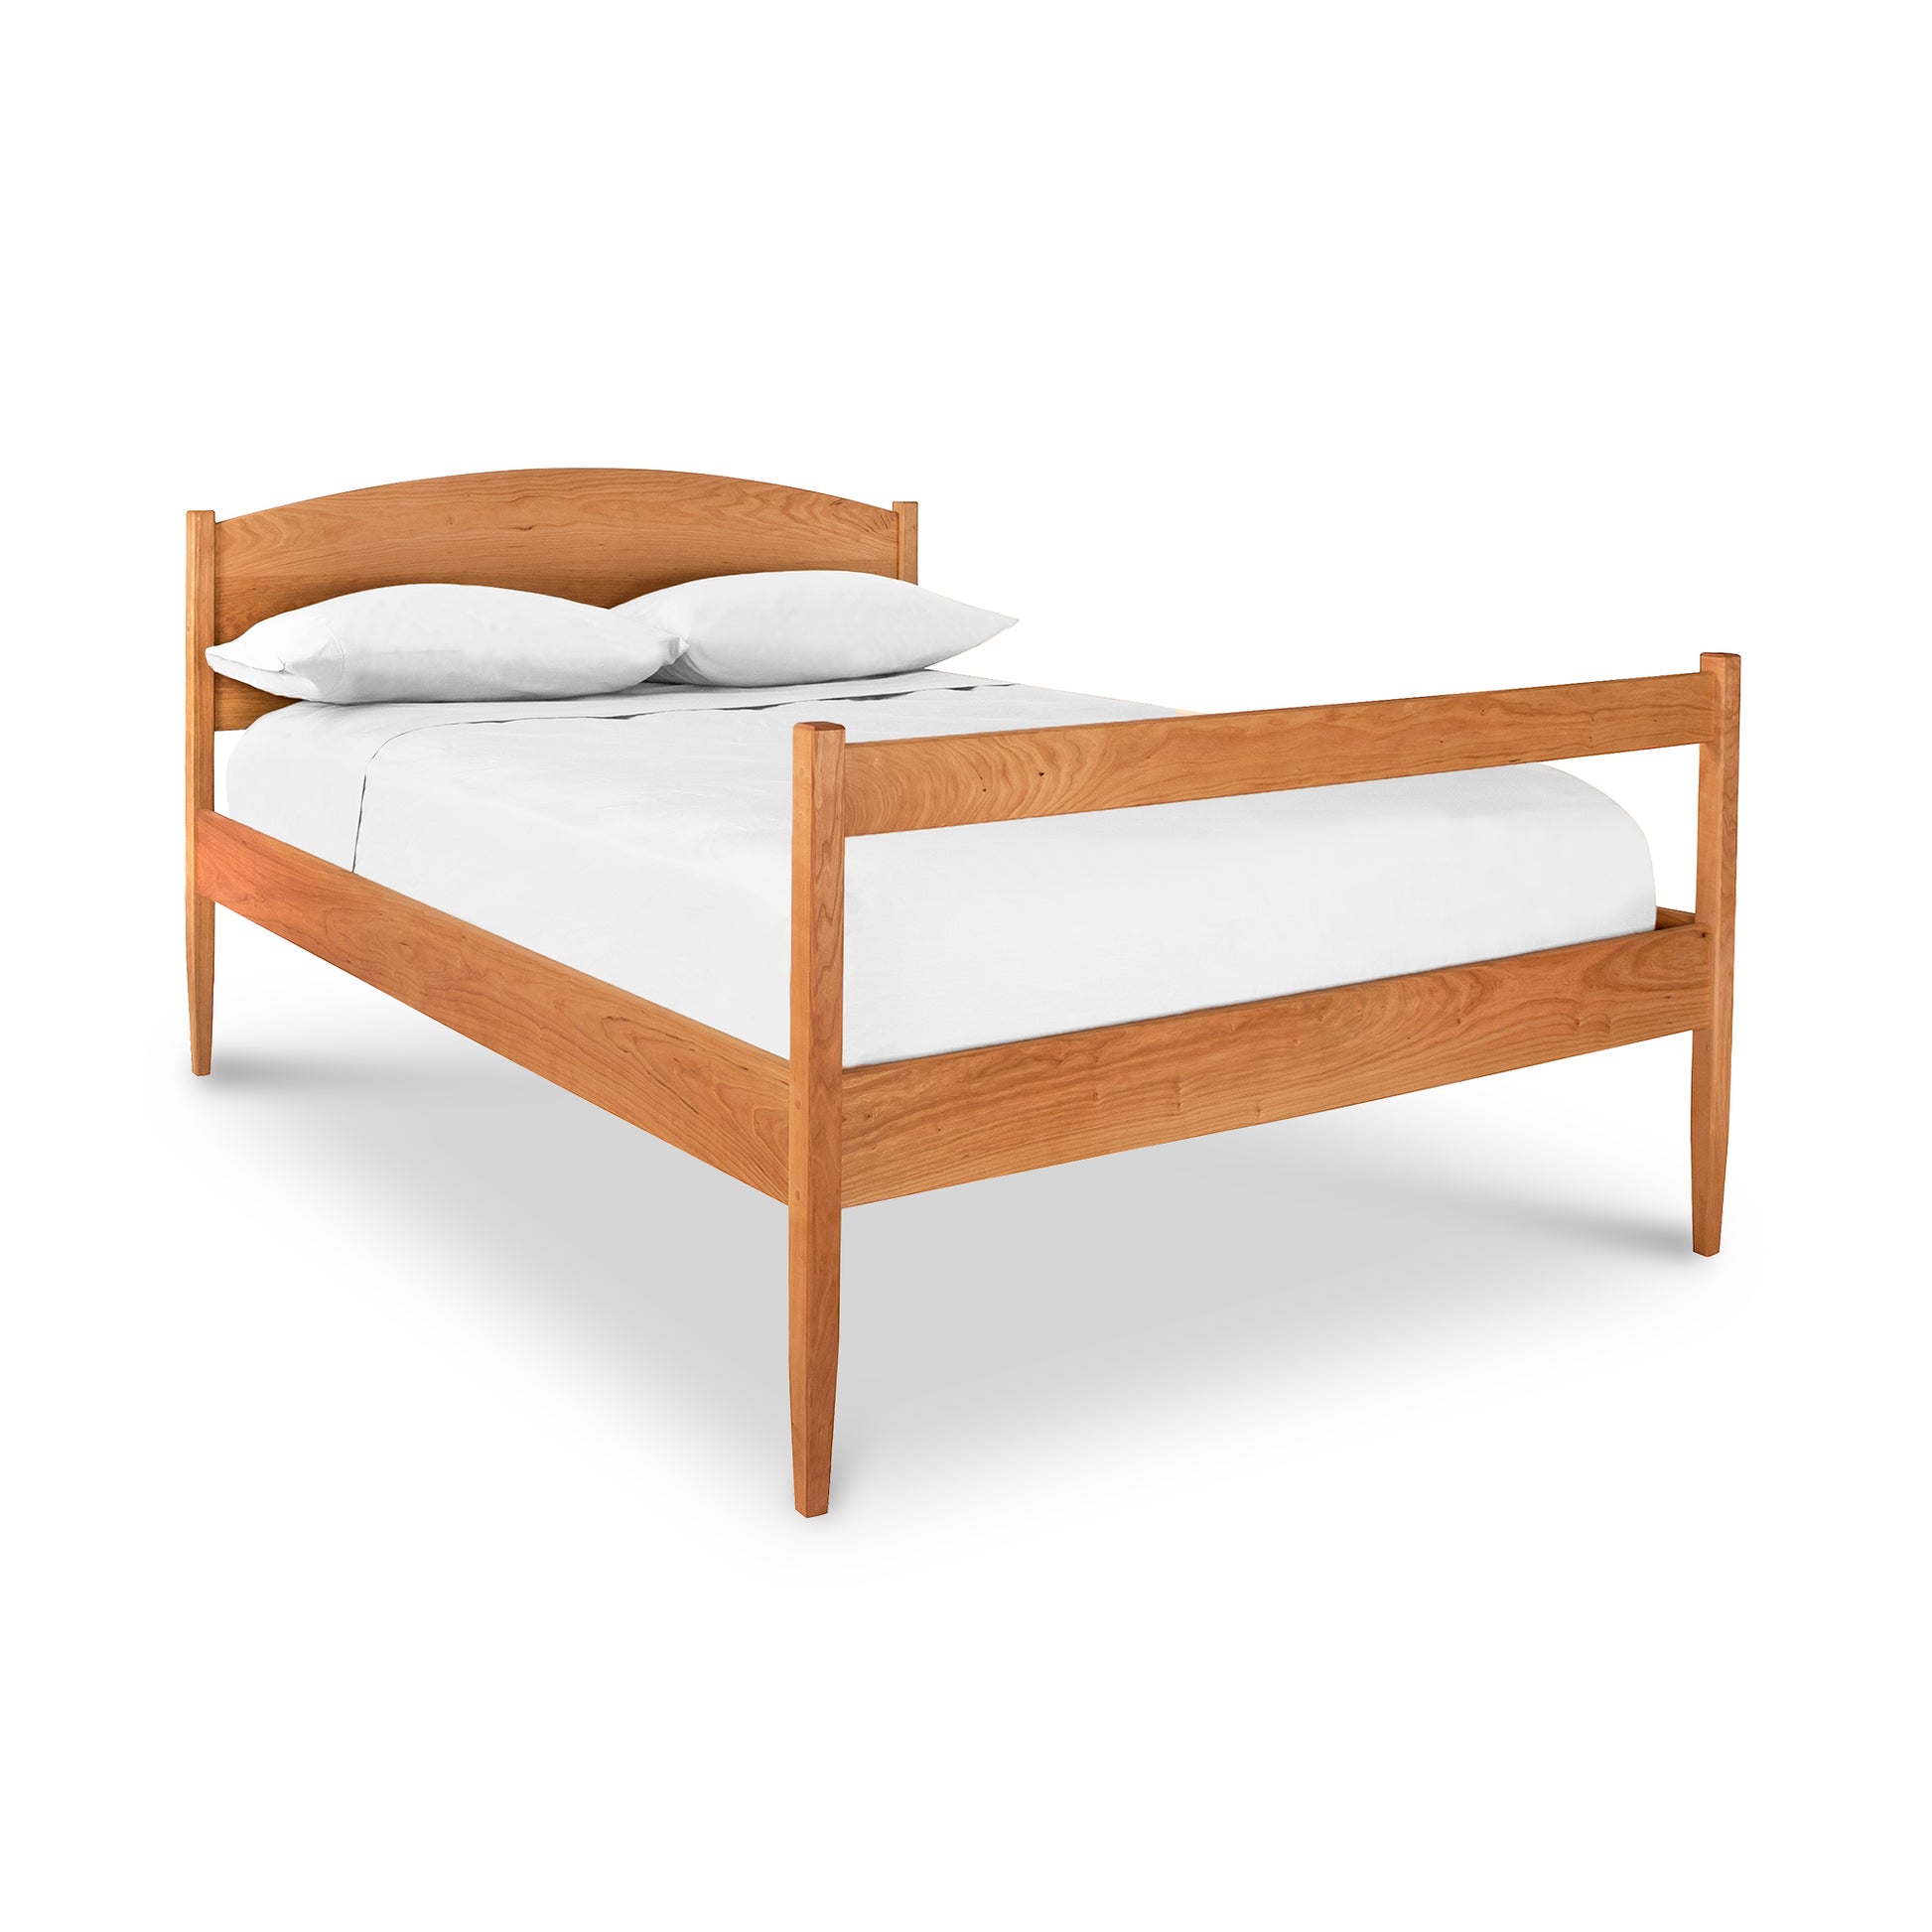 A wooden bed with white sheets on it.